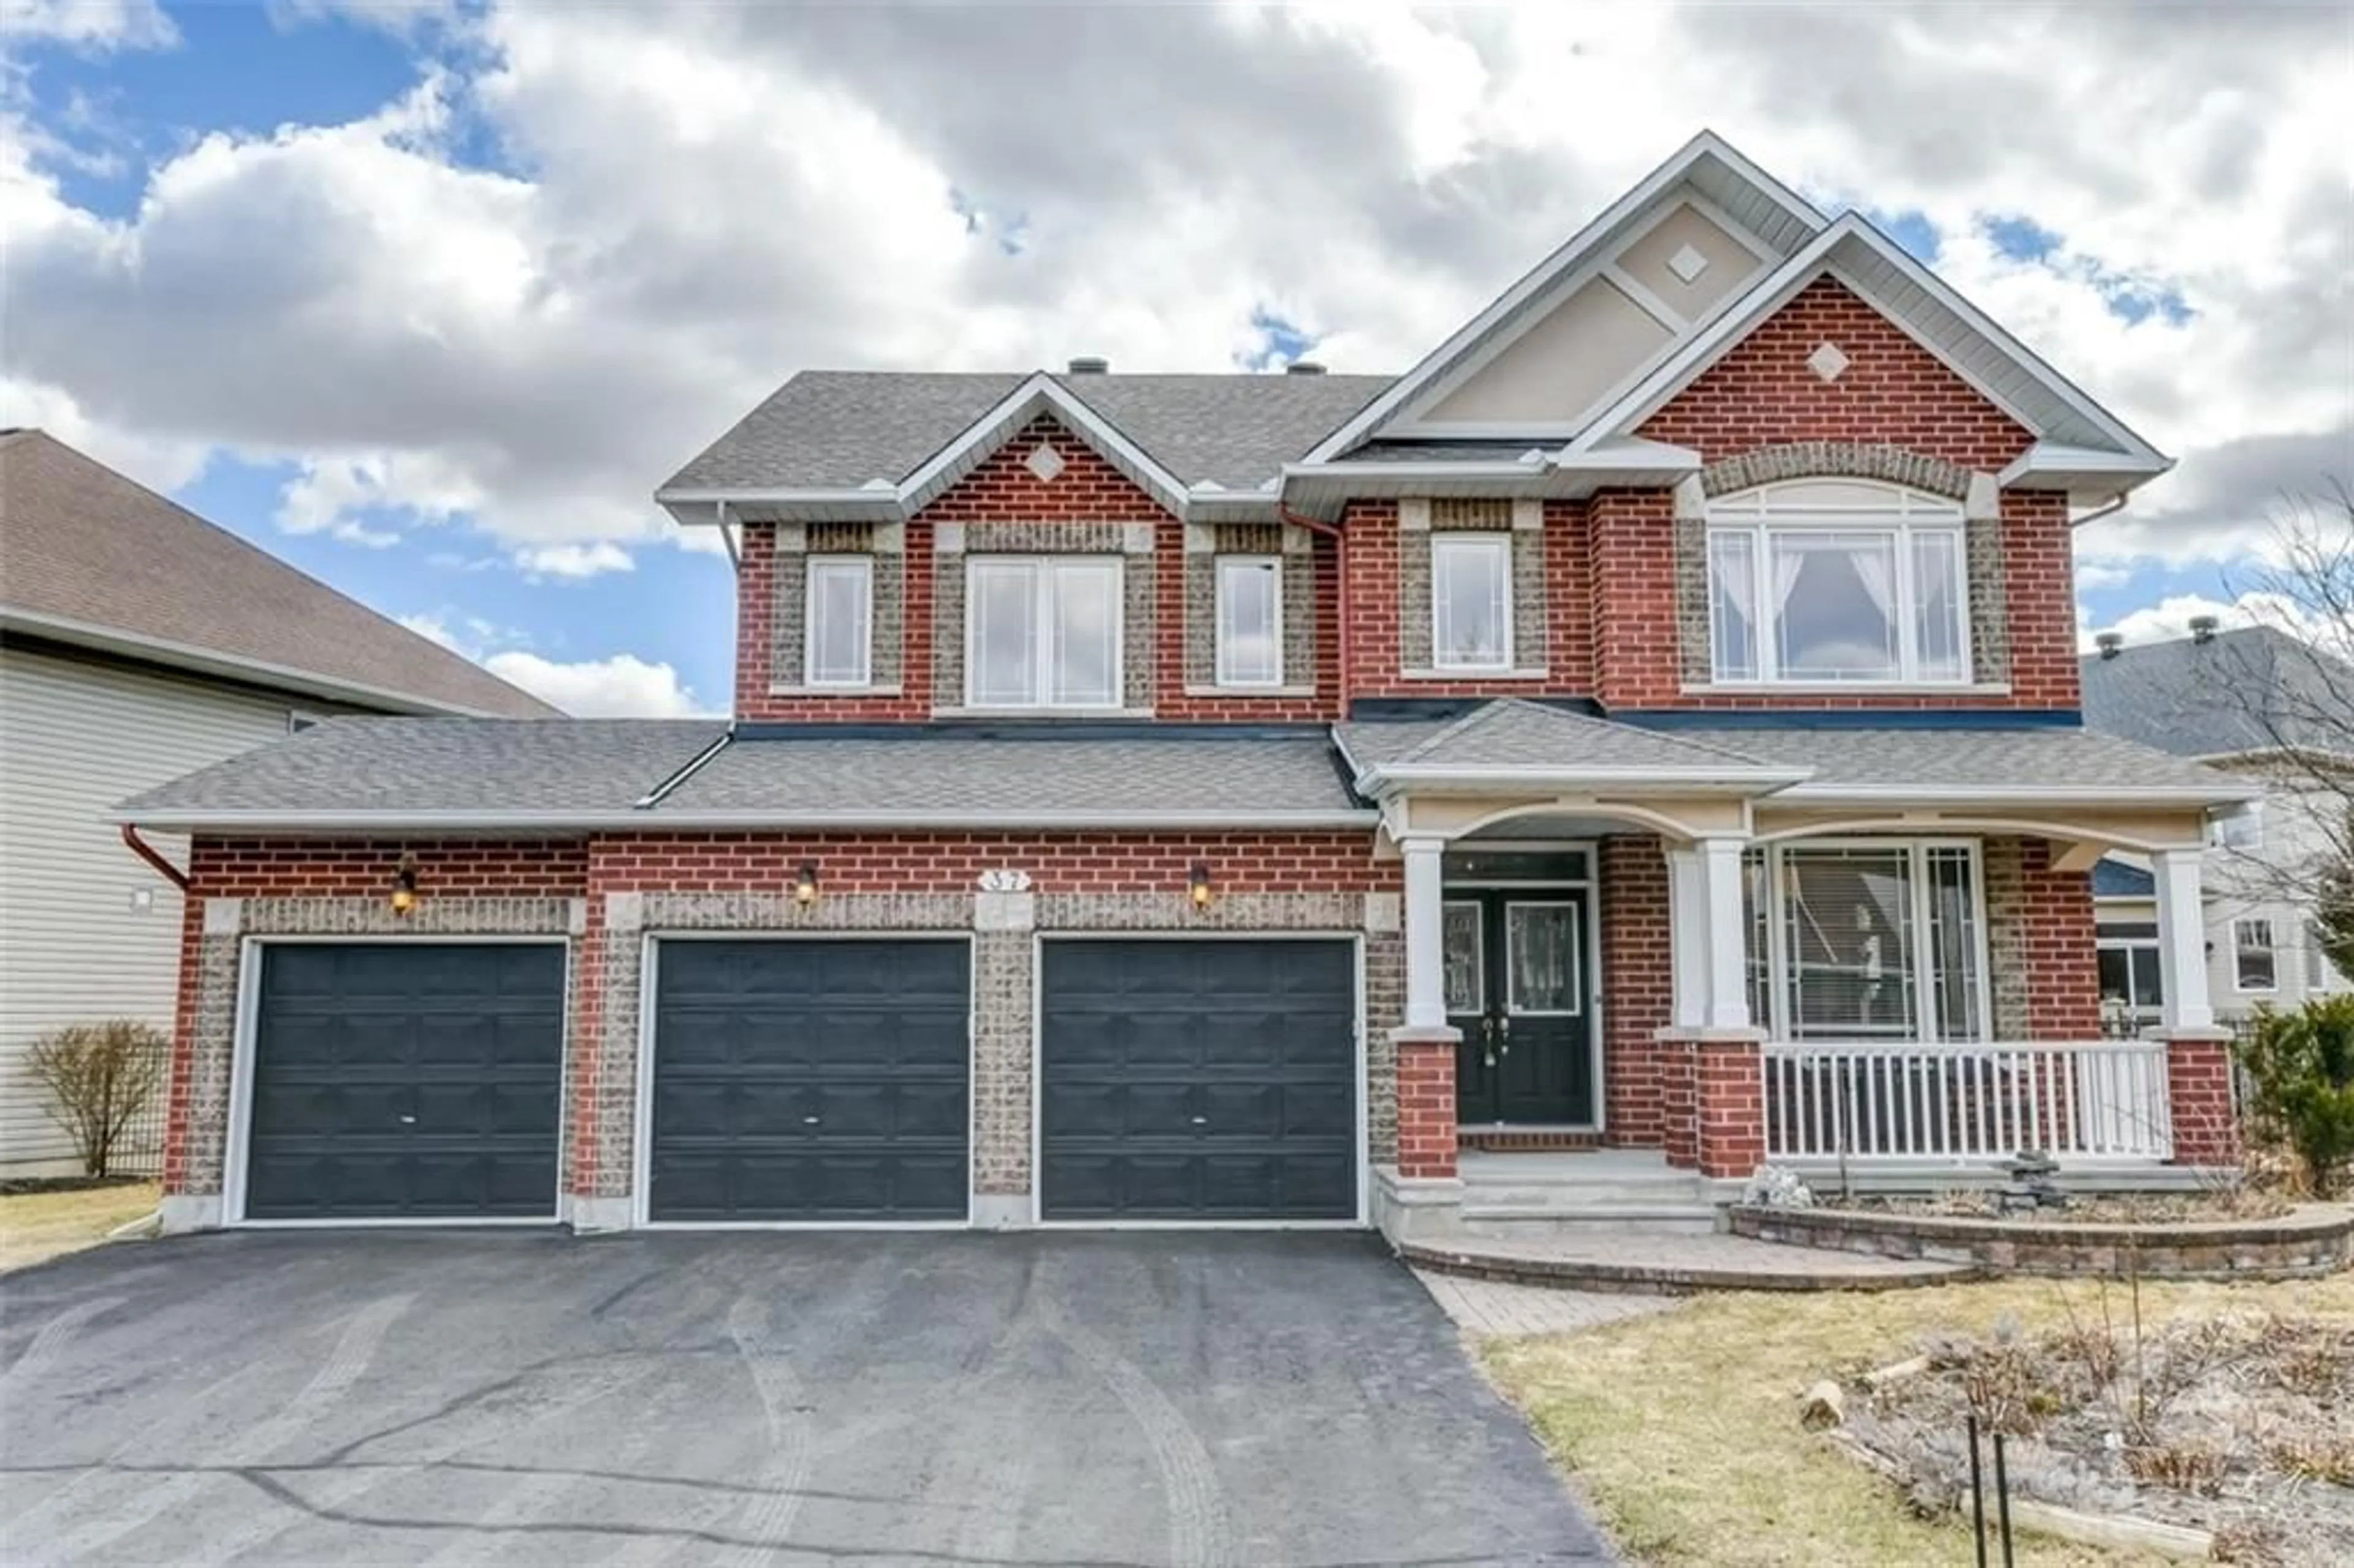 Home with brick exterior material for 37 QUARRY RIDGE Dr, Orleans Ontario K1C 7S1